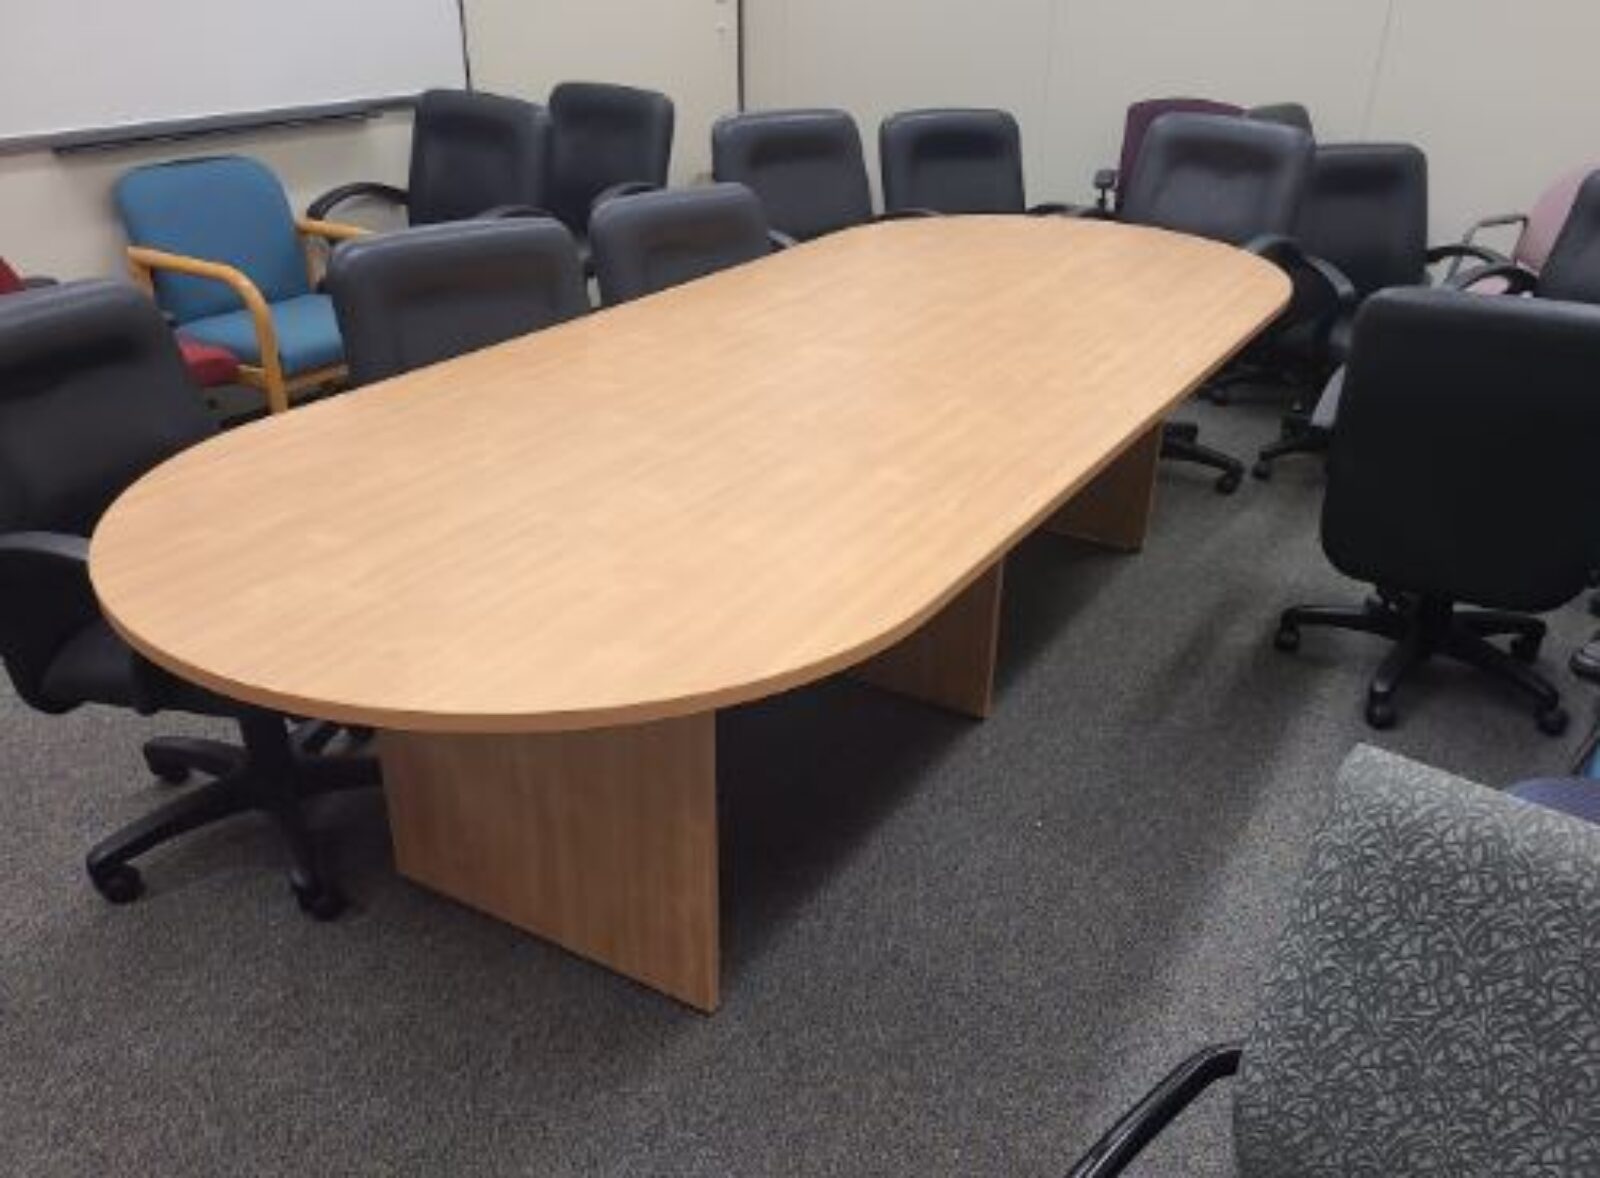 Boardroom table, 10 feet long x 4 feet wide x 30 inches tall